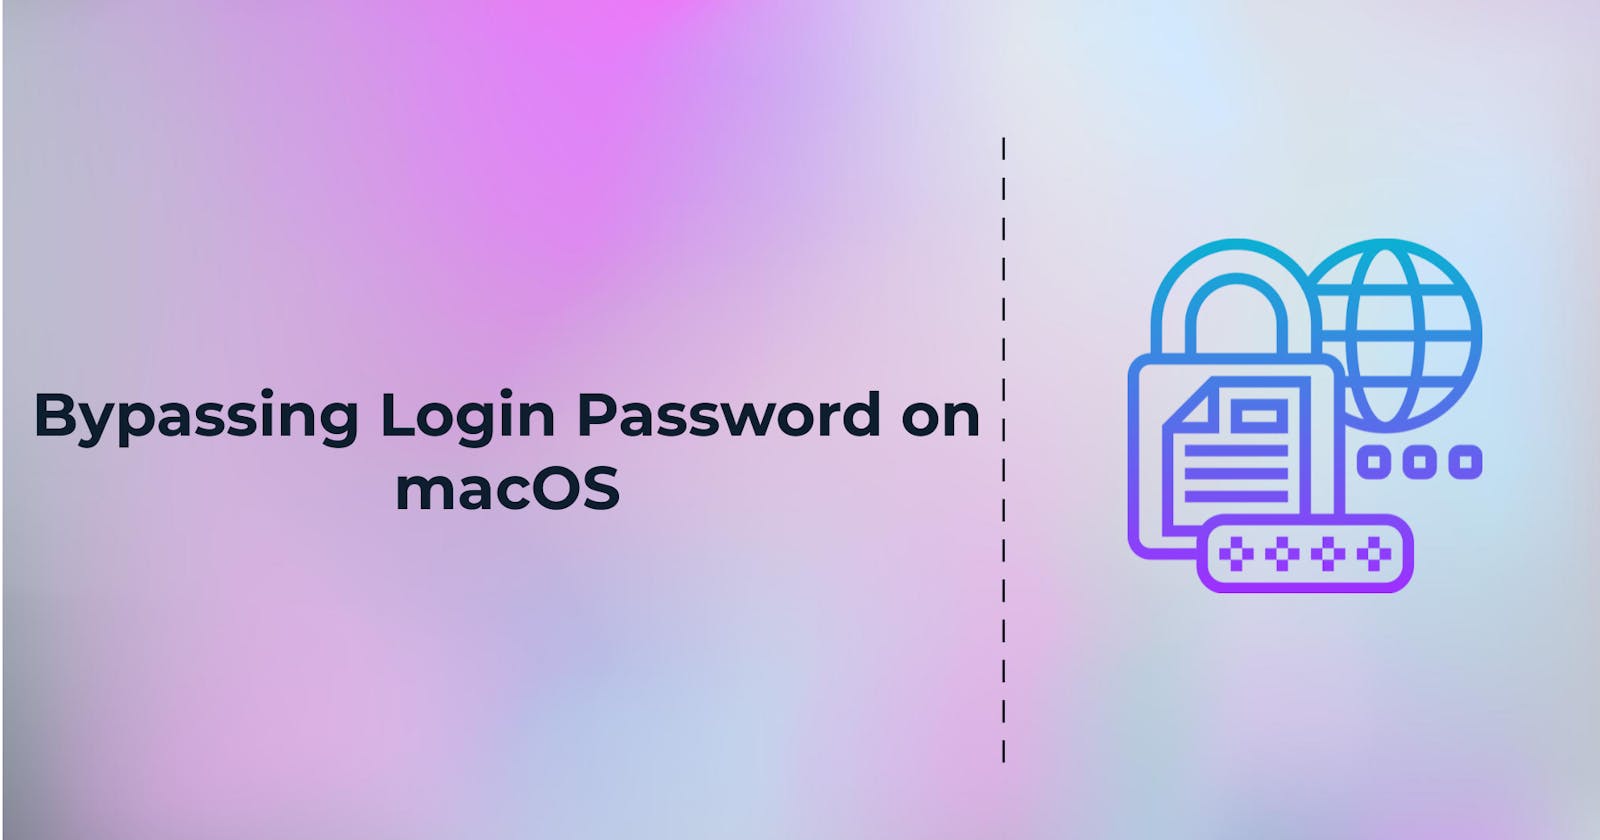 Bypassing Login Password on macOS